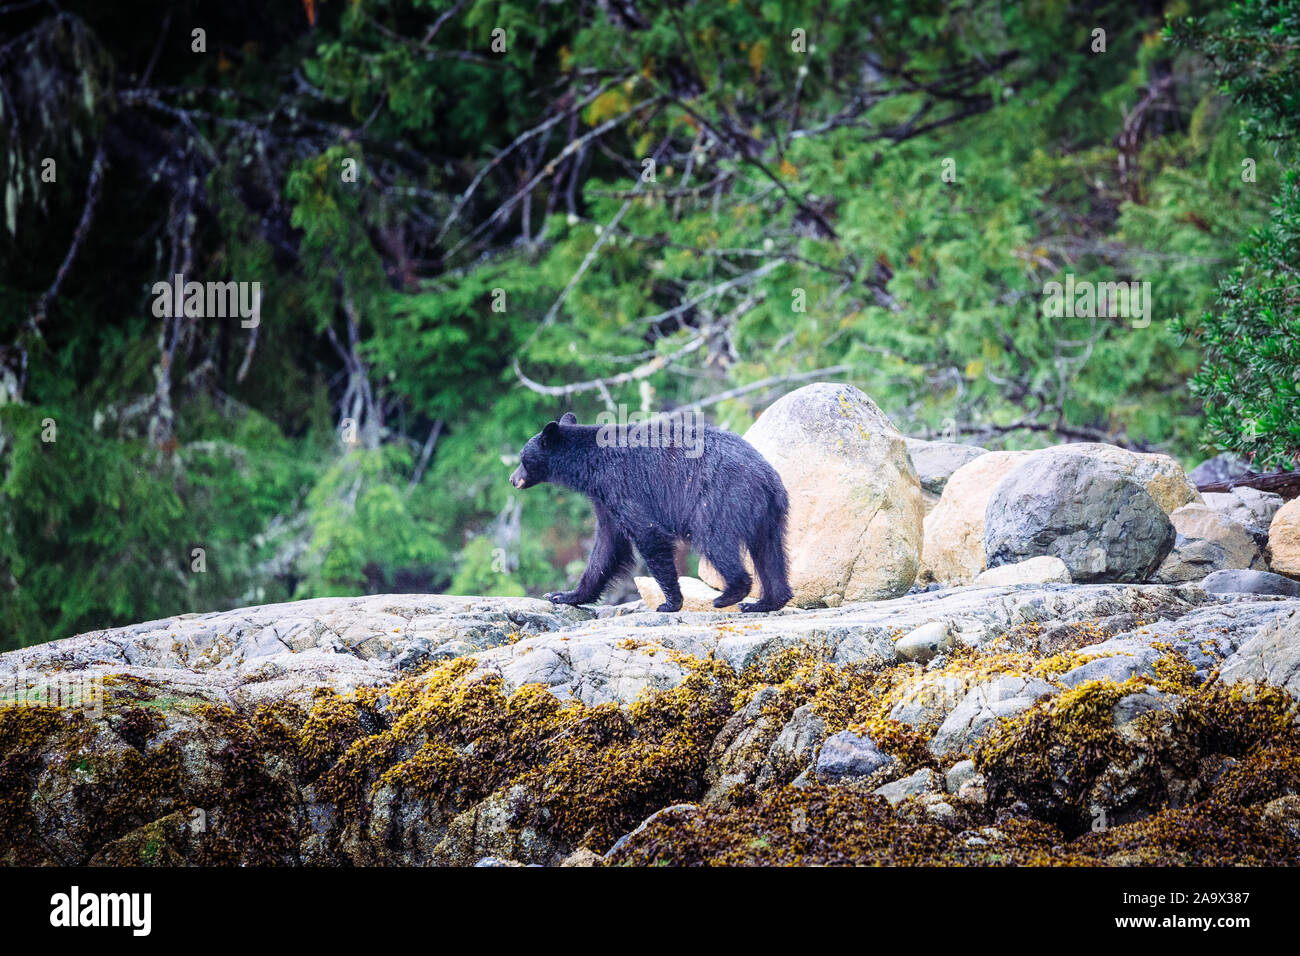 Black Bear searching for food at low tide, Tofino, British Columbia, Canada Stock Photo